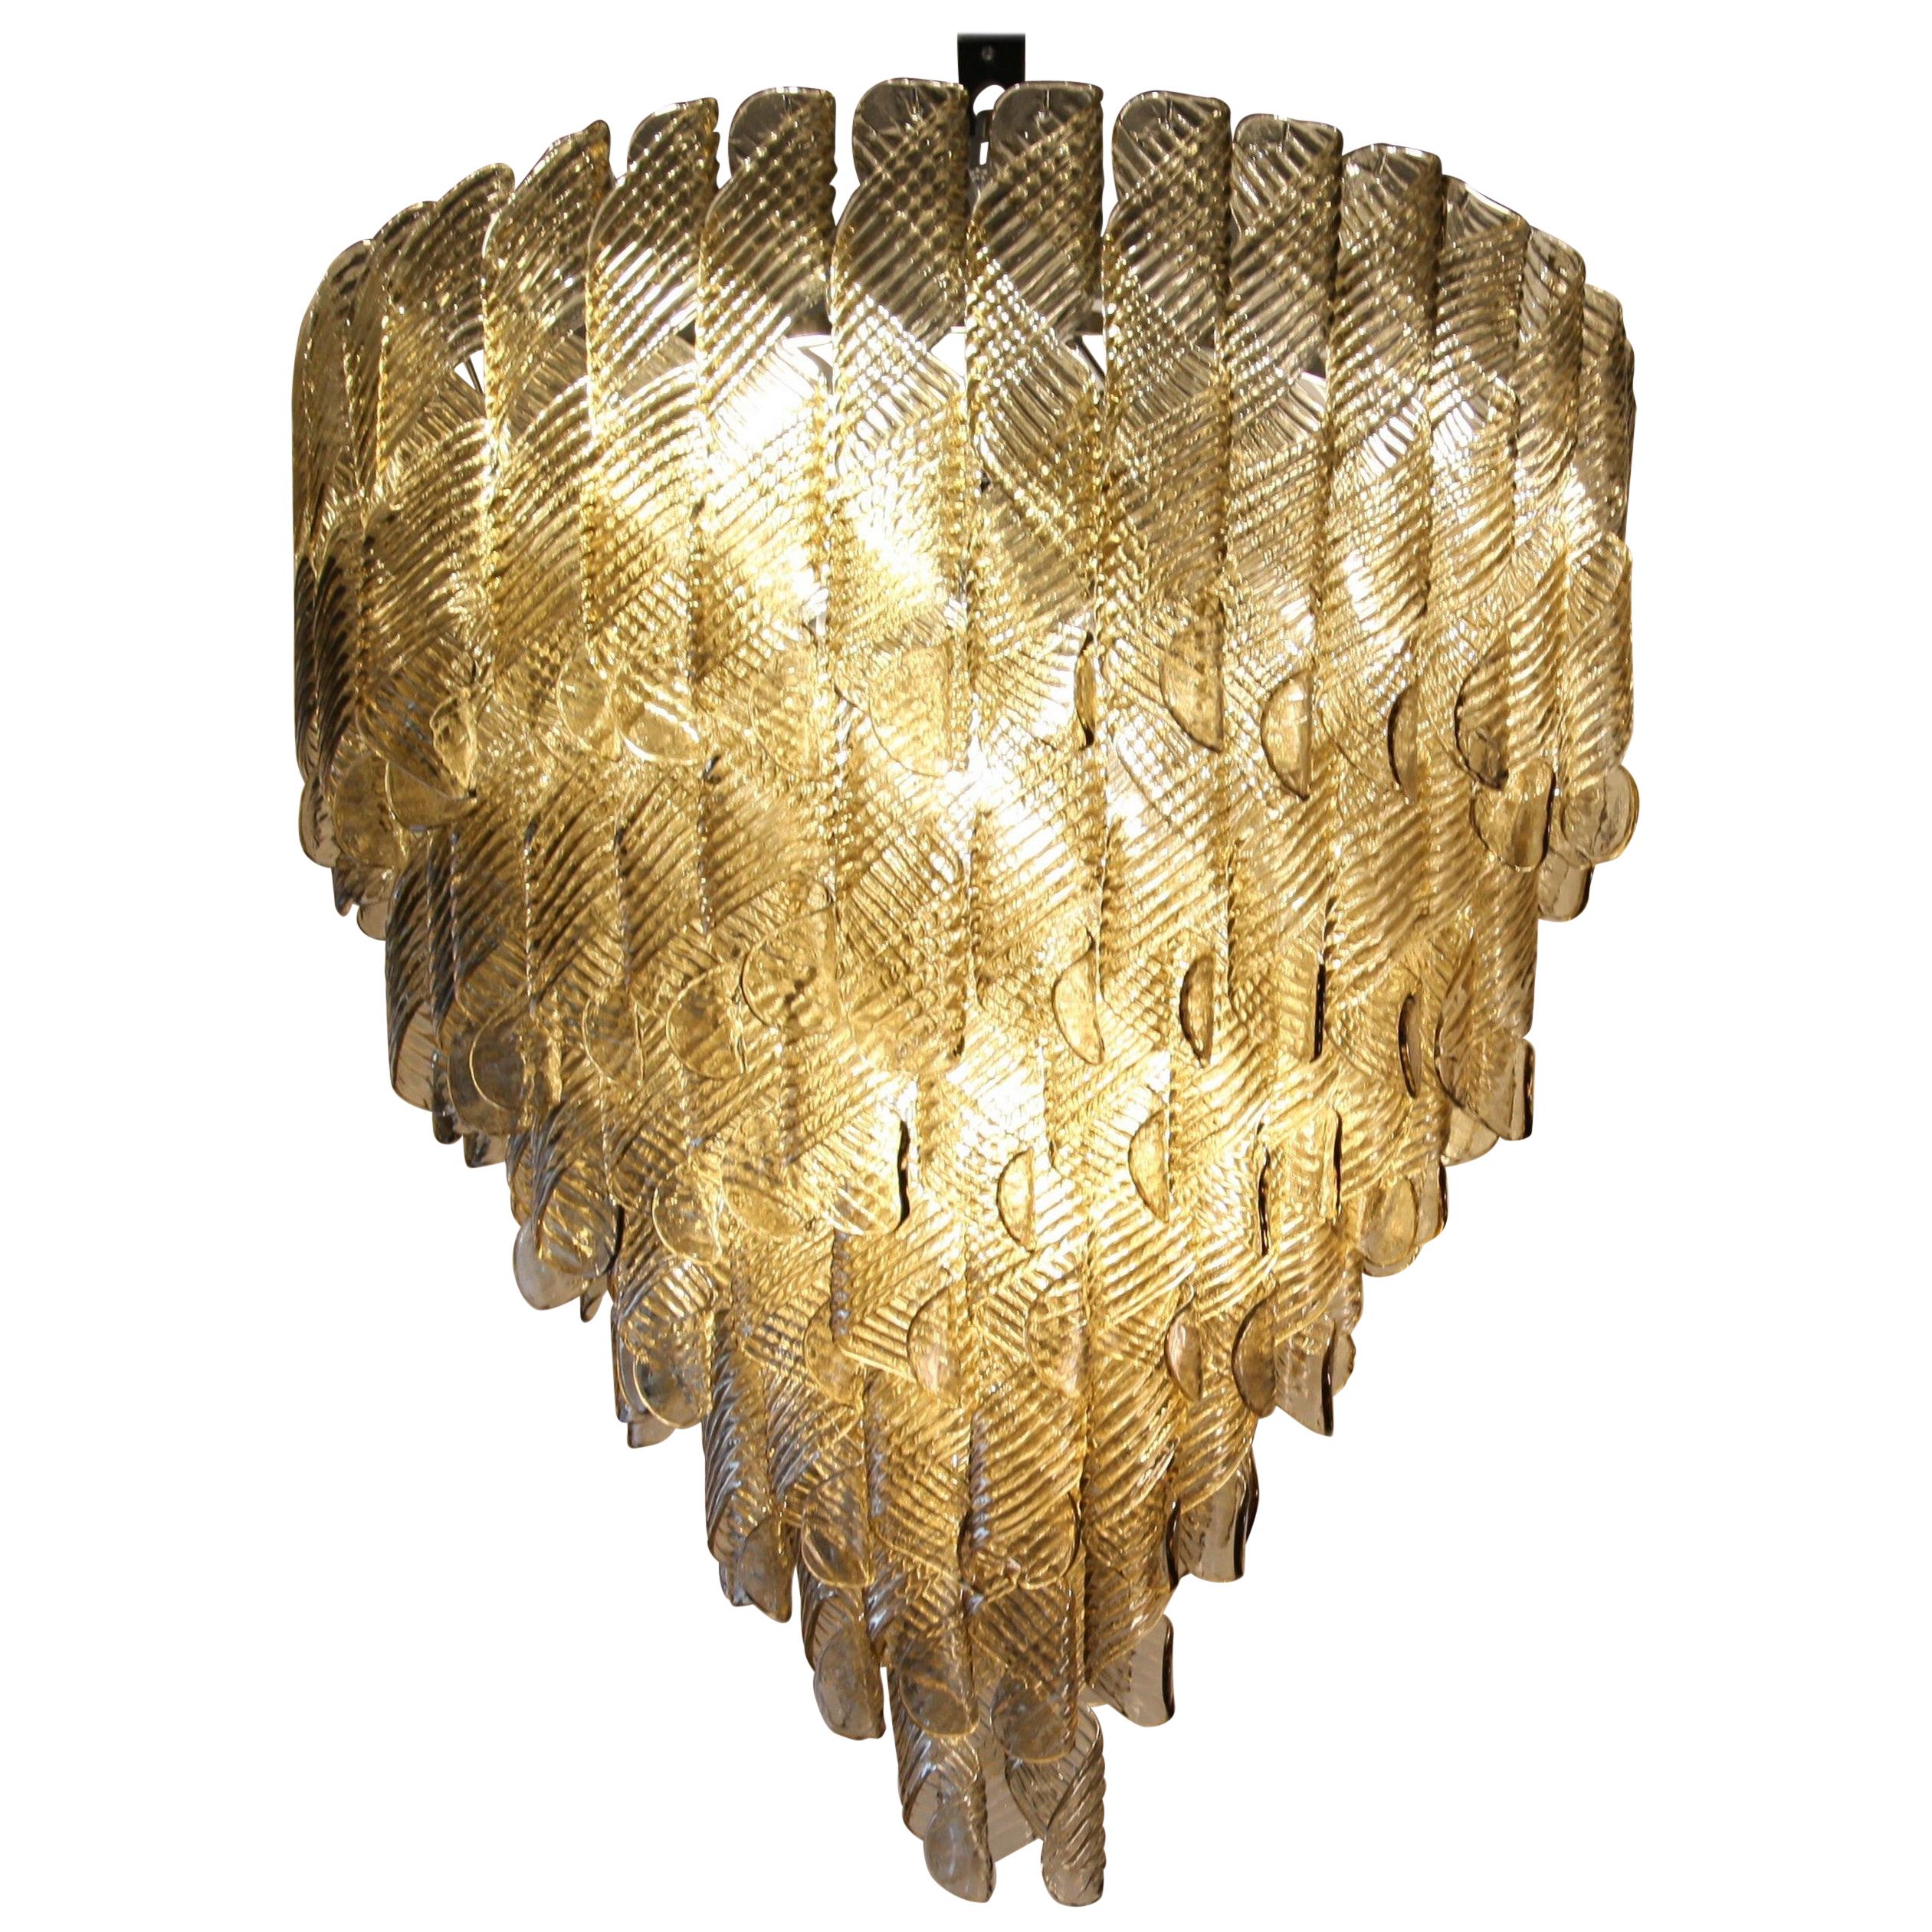 Monumental Chandelier, Murano Fume Glass in Spiral Ribbed Elements, 7 Tiers